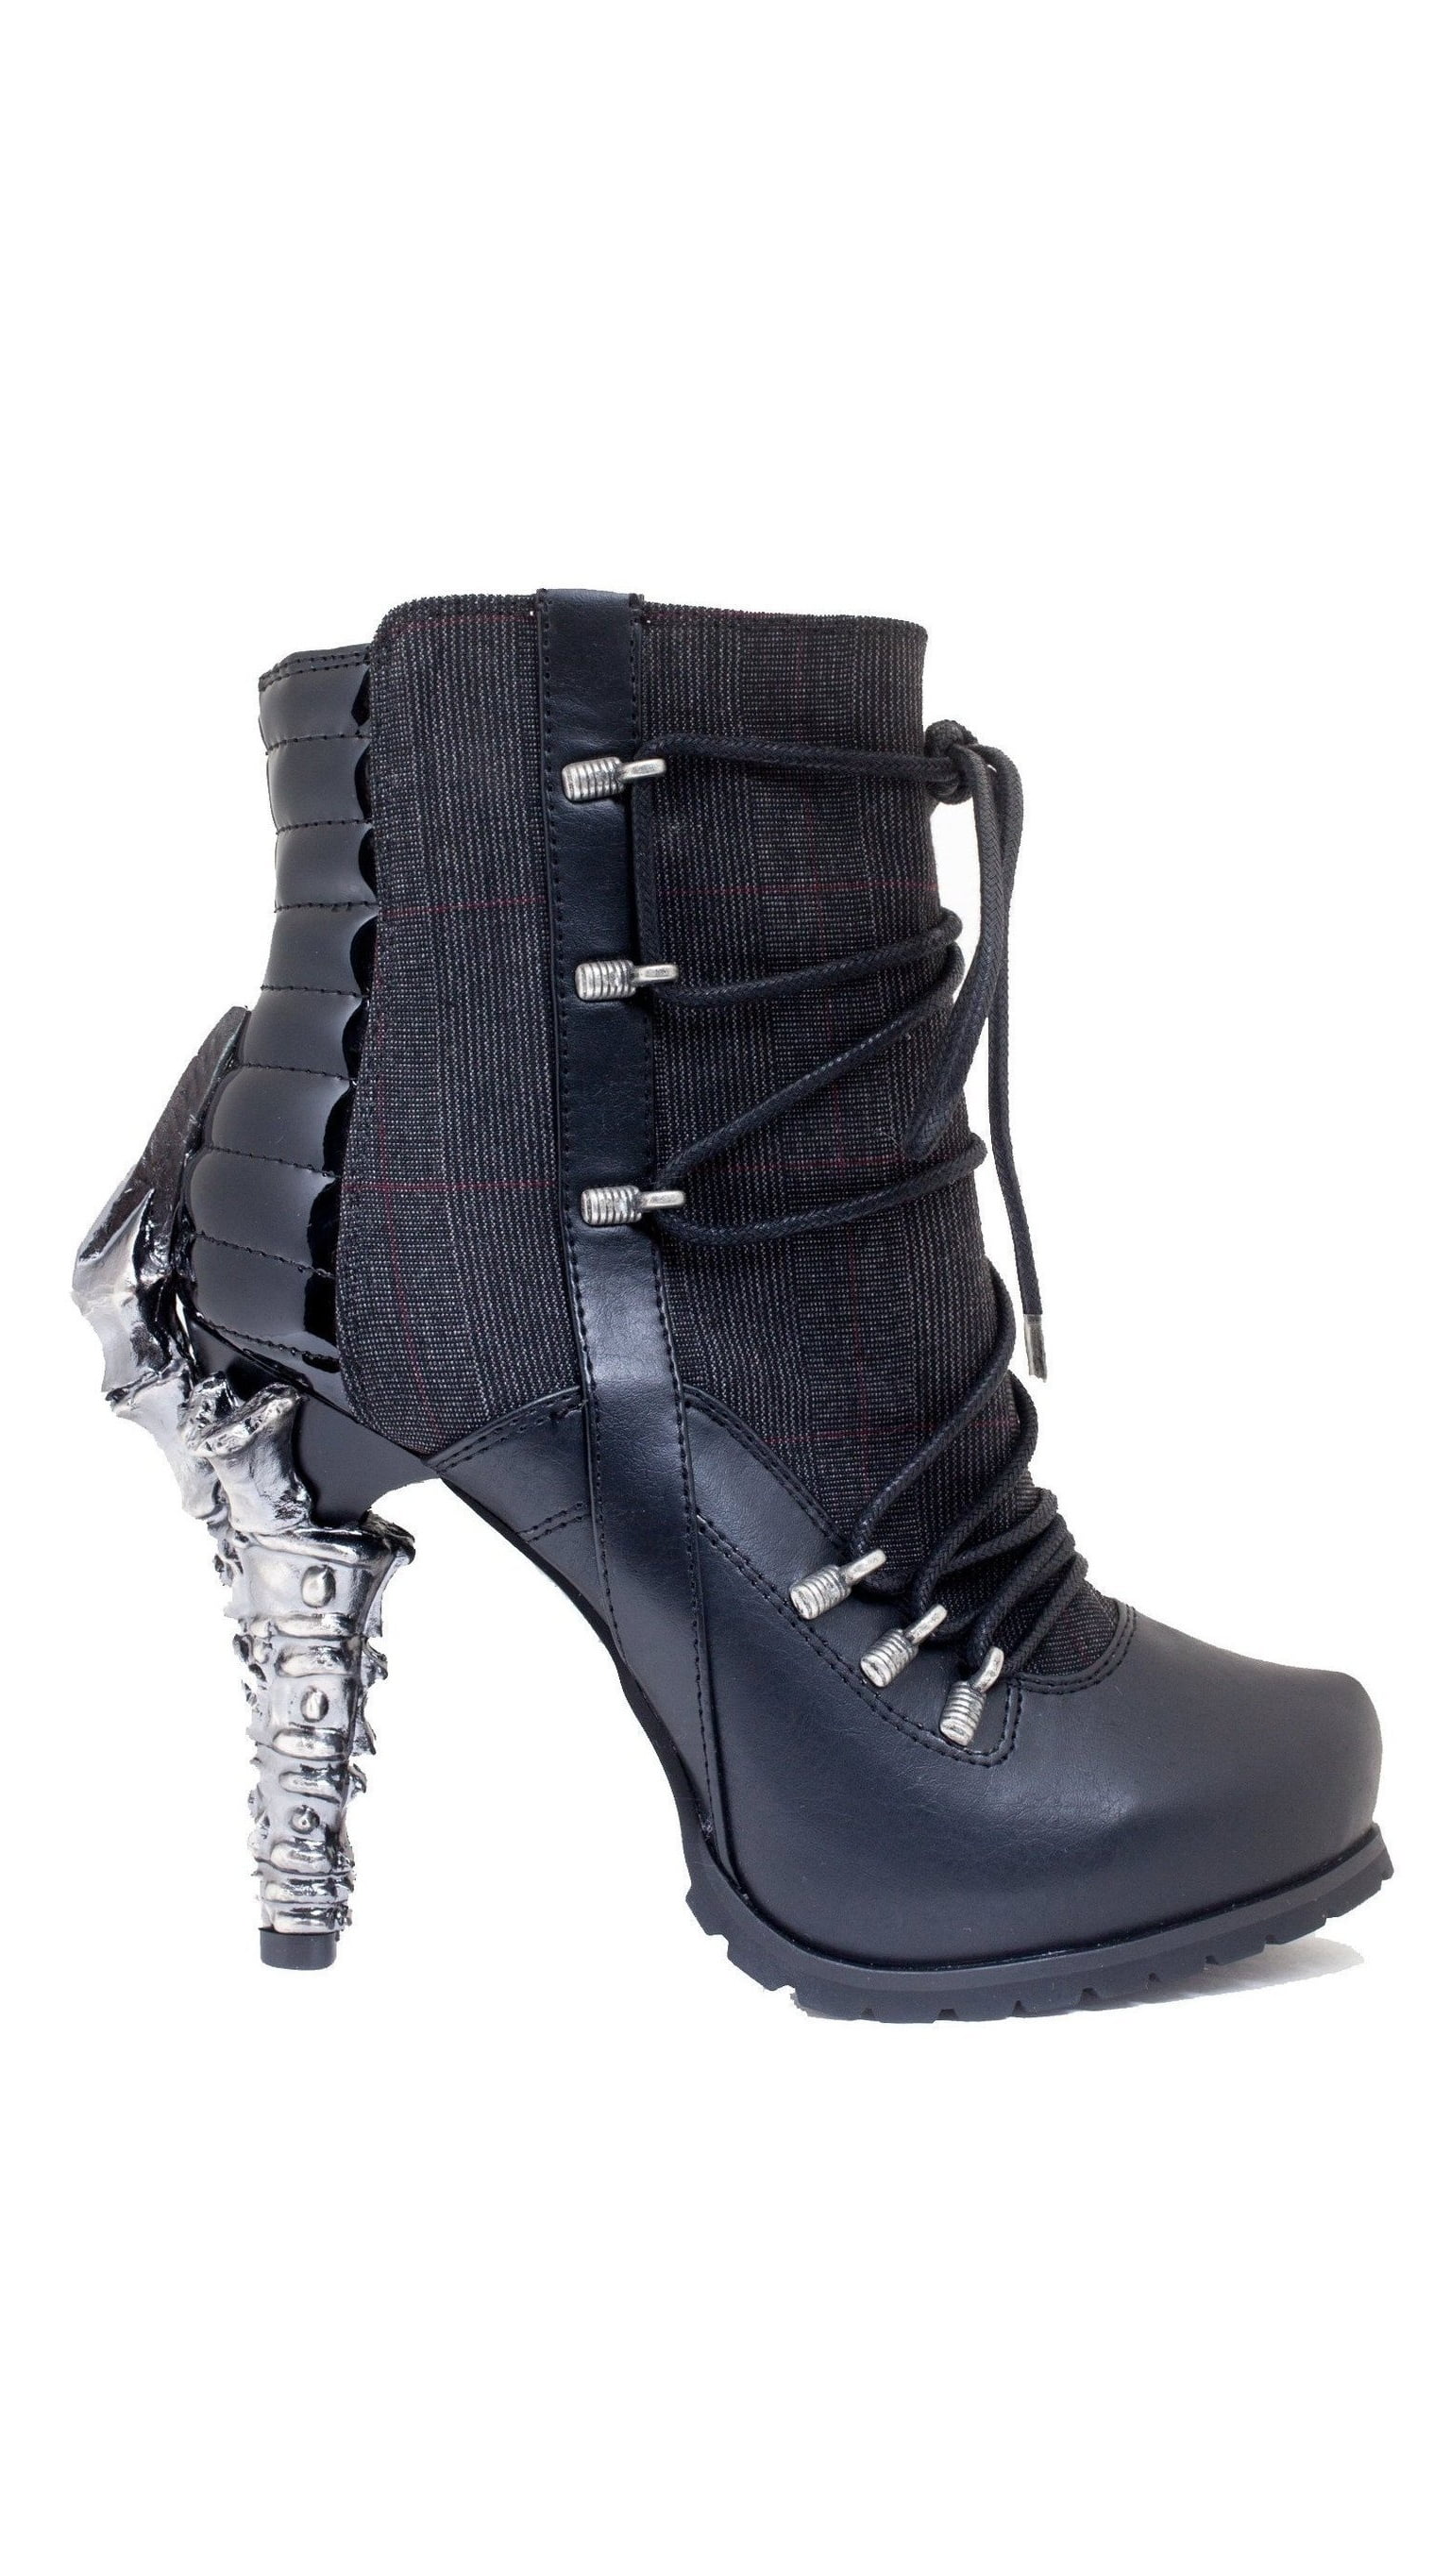 Hades Shoes H-SHADE Biker inspired ankle boots with adjustable front ...